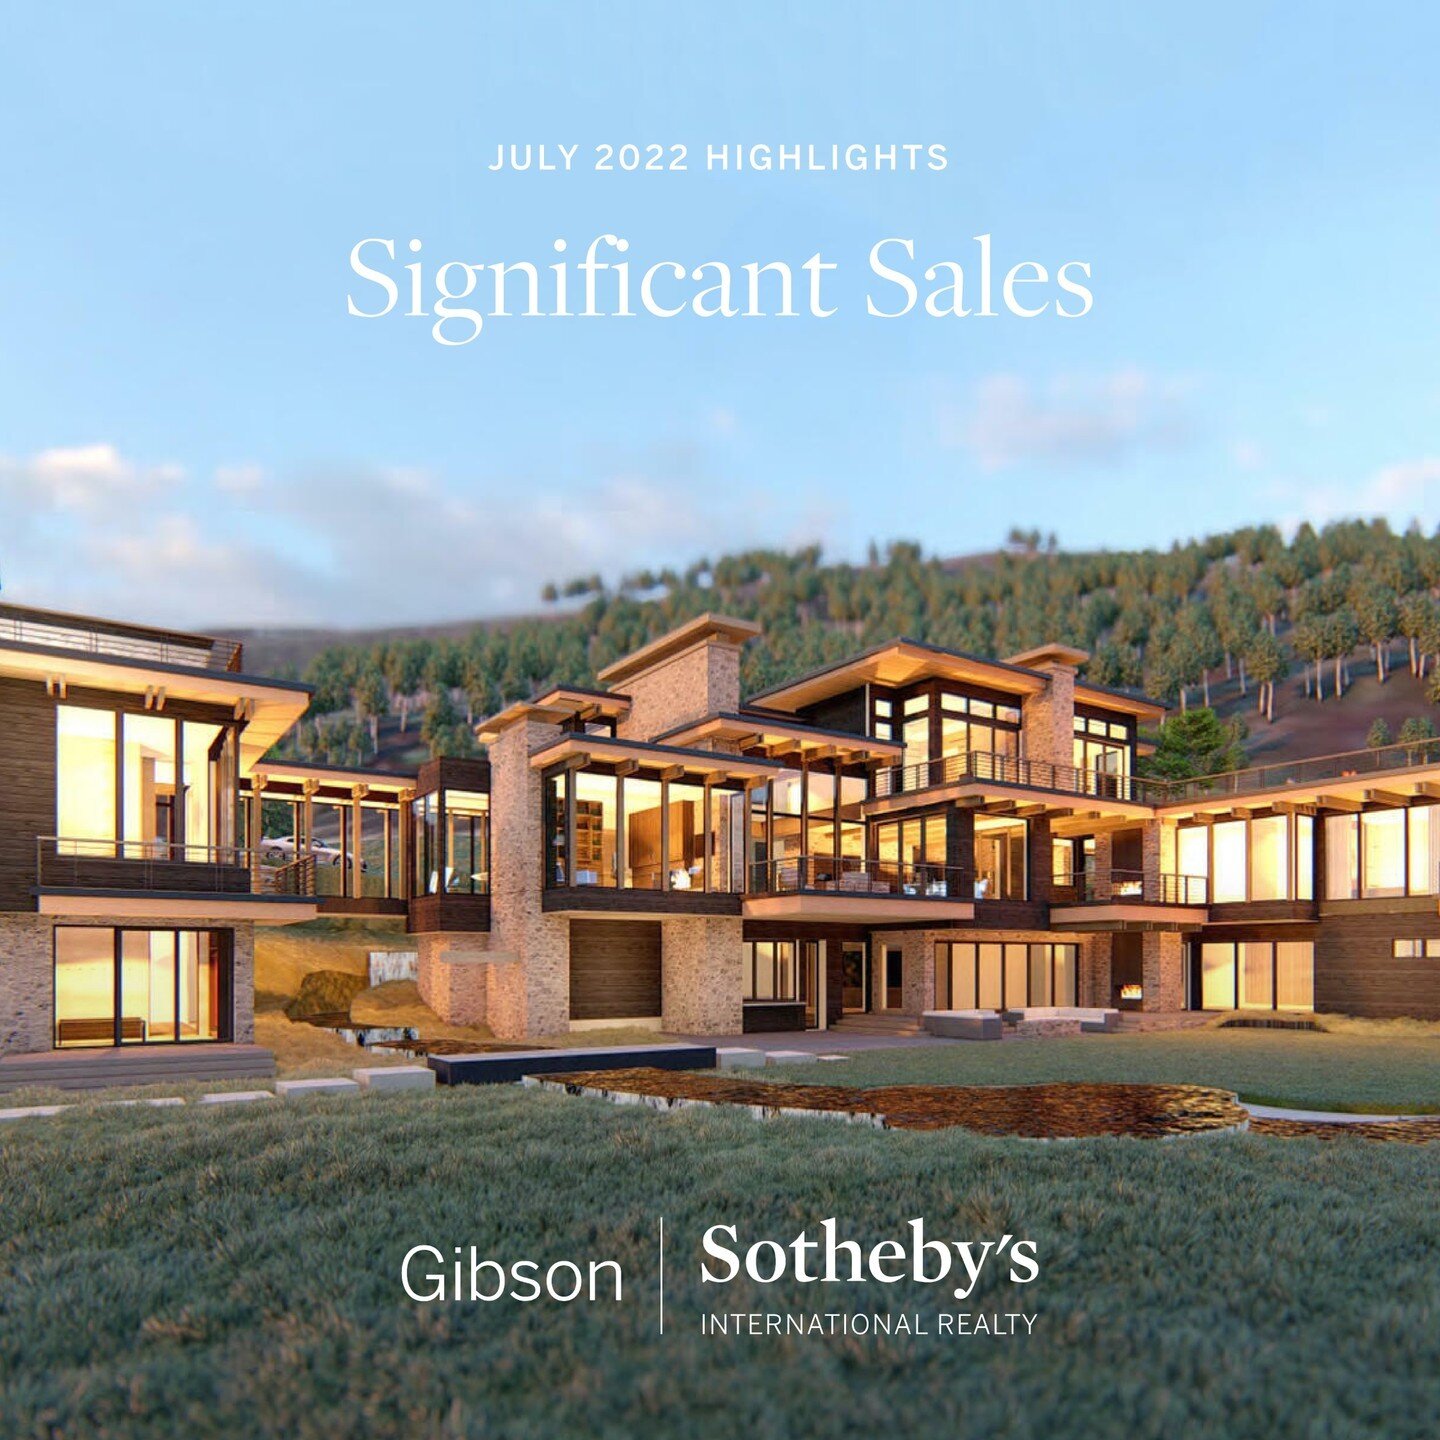 Significant Sales: July 2022 Highlights⁠
⁠
From a US$58M sale in The Bahamas to a US$22.5M sale in Park City, Utah, here are five sales represented by the Sotheby&rsquo;s International Realty&reg; global network in June. Promotional assets are availa